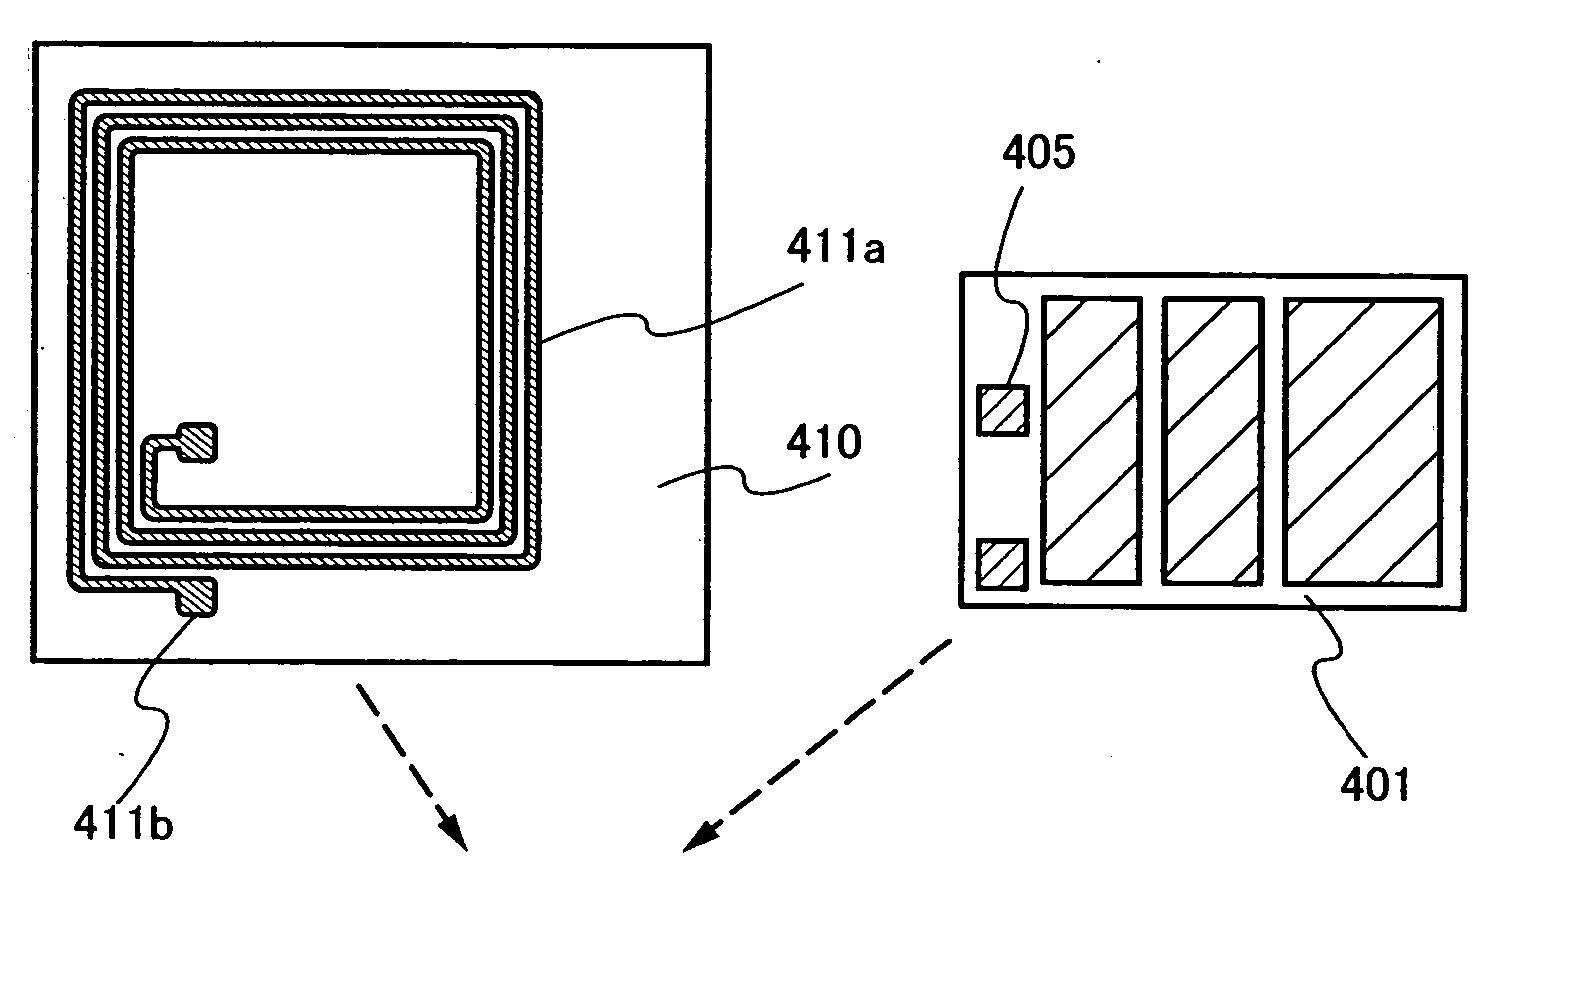 Semiconductor device, RFID tag and label-like object